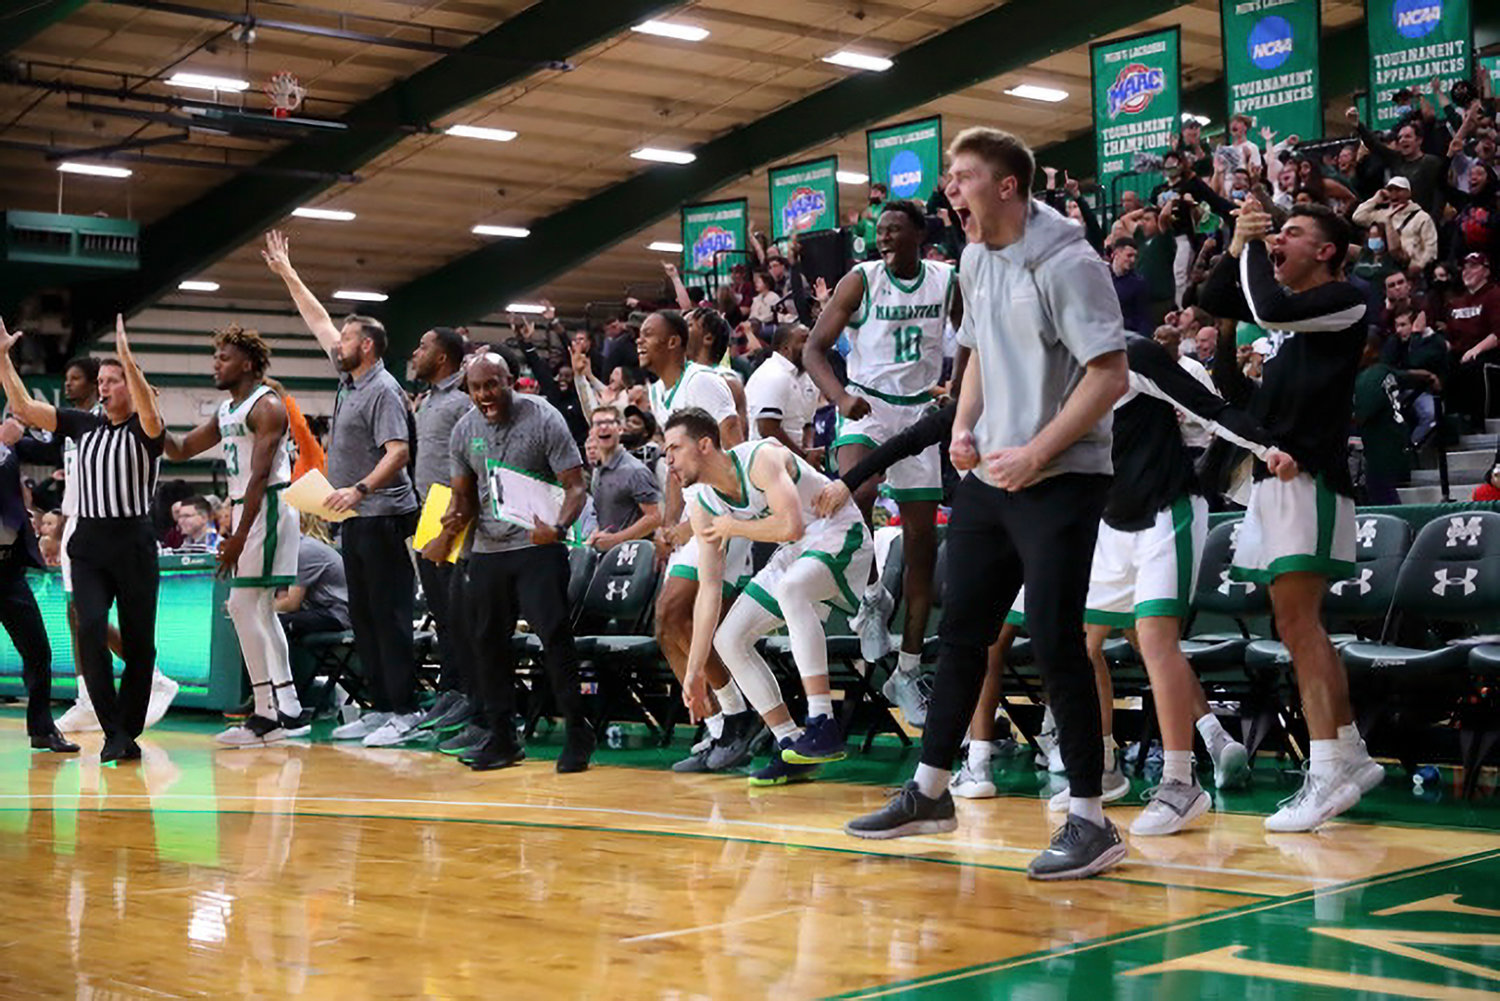 Jaspers men’s basketball team celebrates winning the 2021 Battle of the Bronx rivalry game against Fordham. This year the game will be played because Fordham had no room on its schedule.